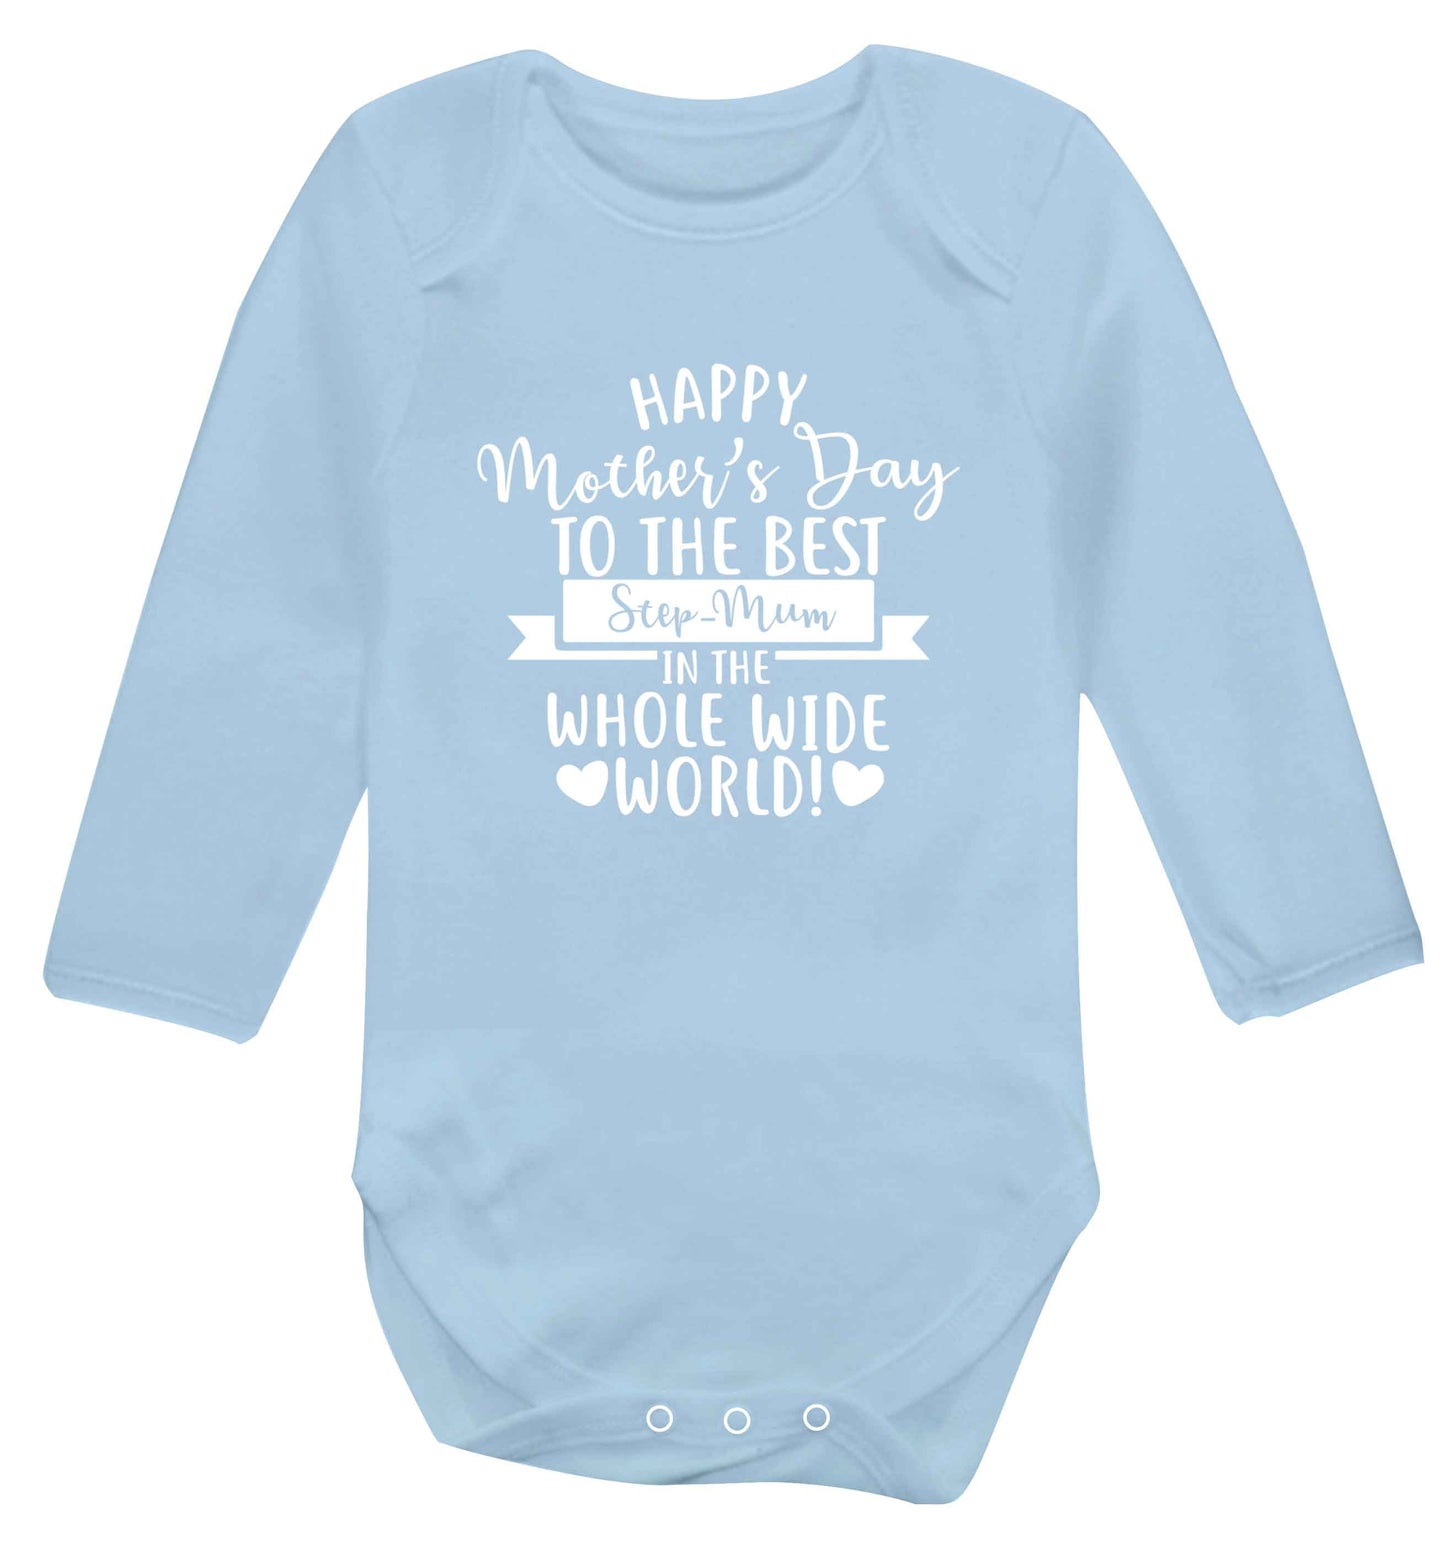 Happy mother's day to the best step-mum in the world baby vest long sleeved pale blue 6-12 months